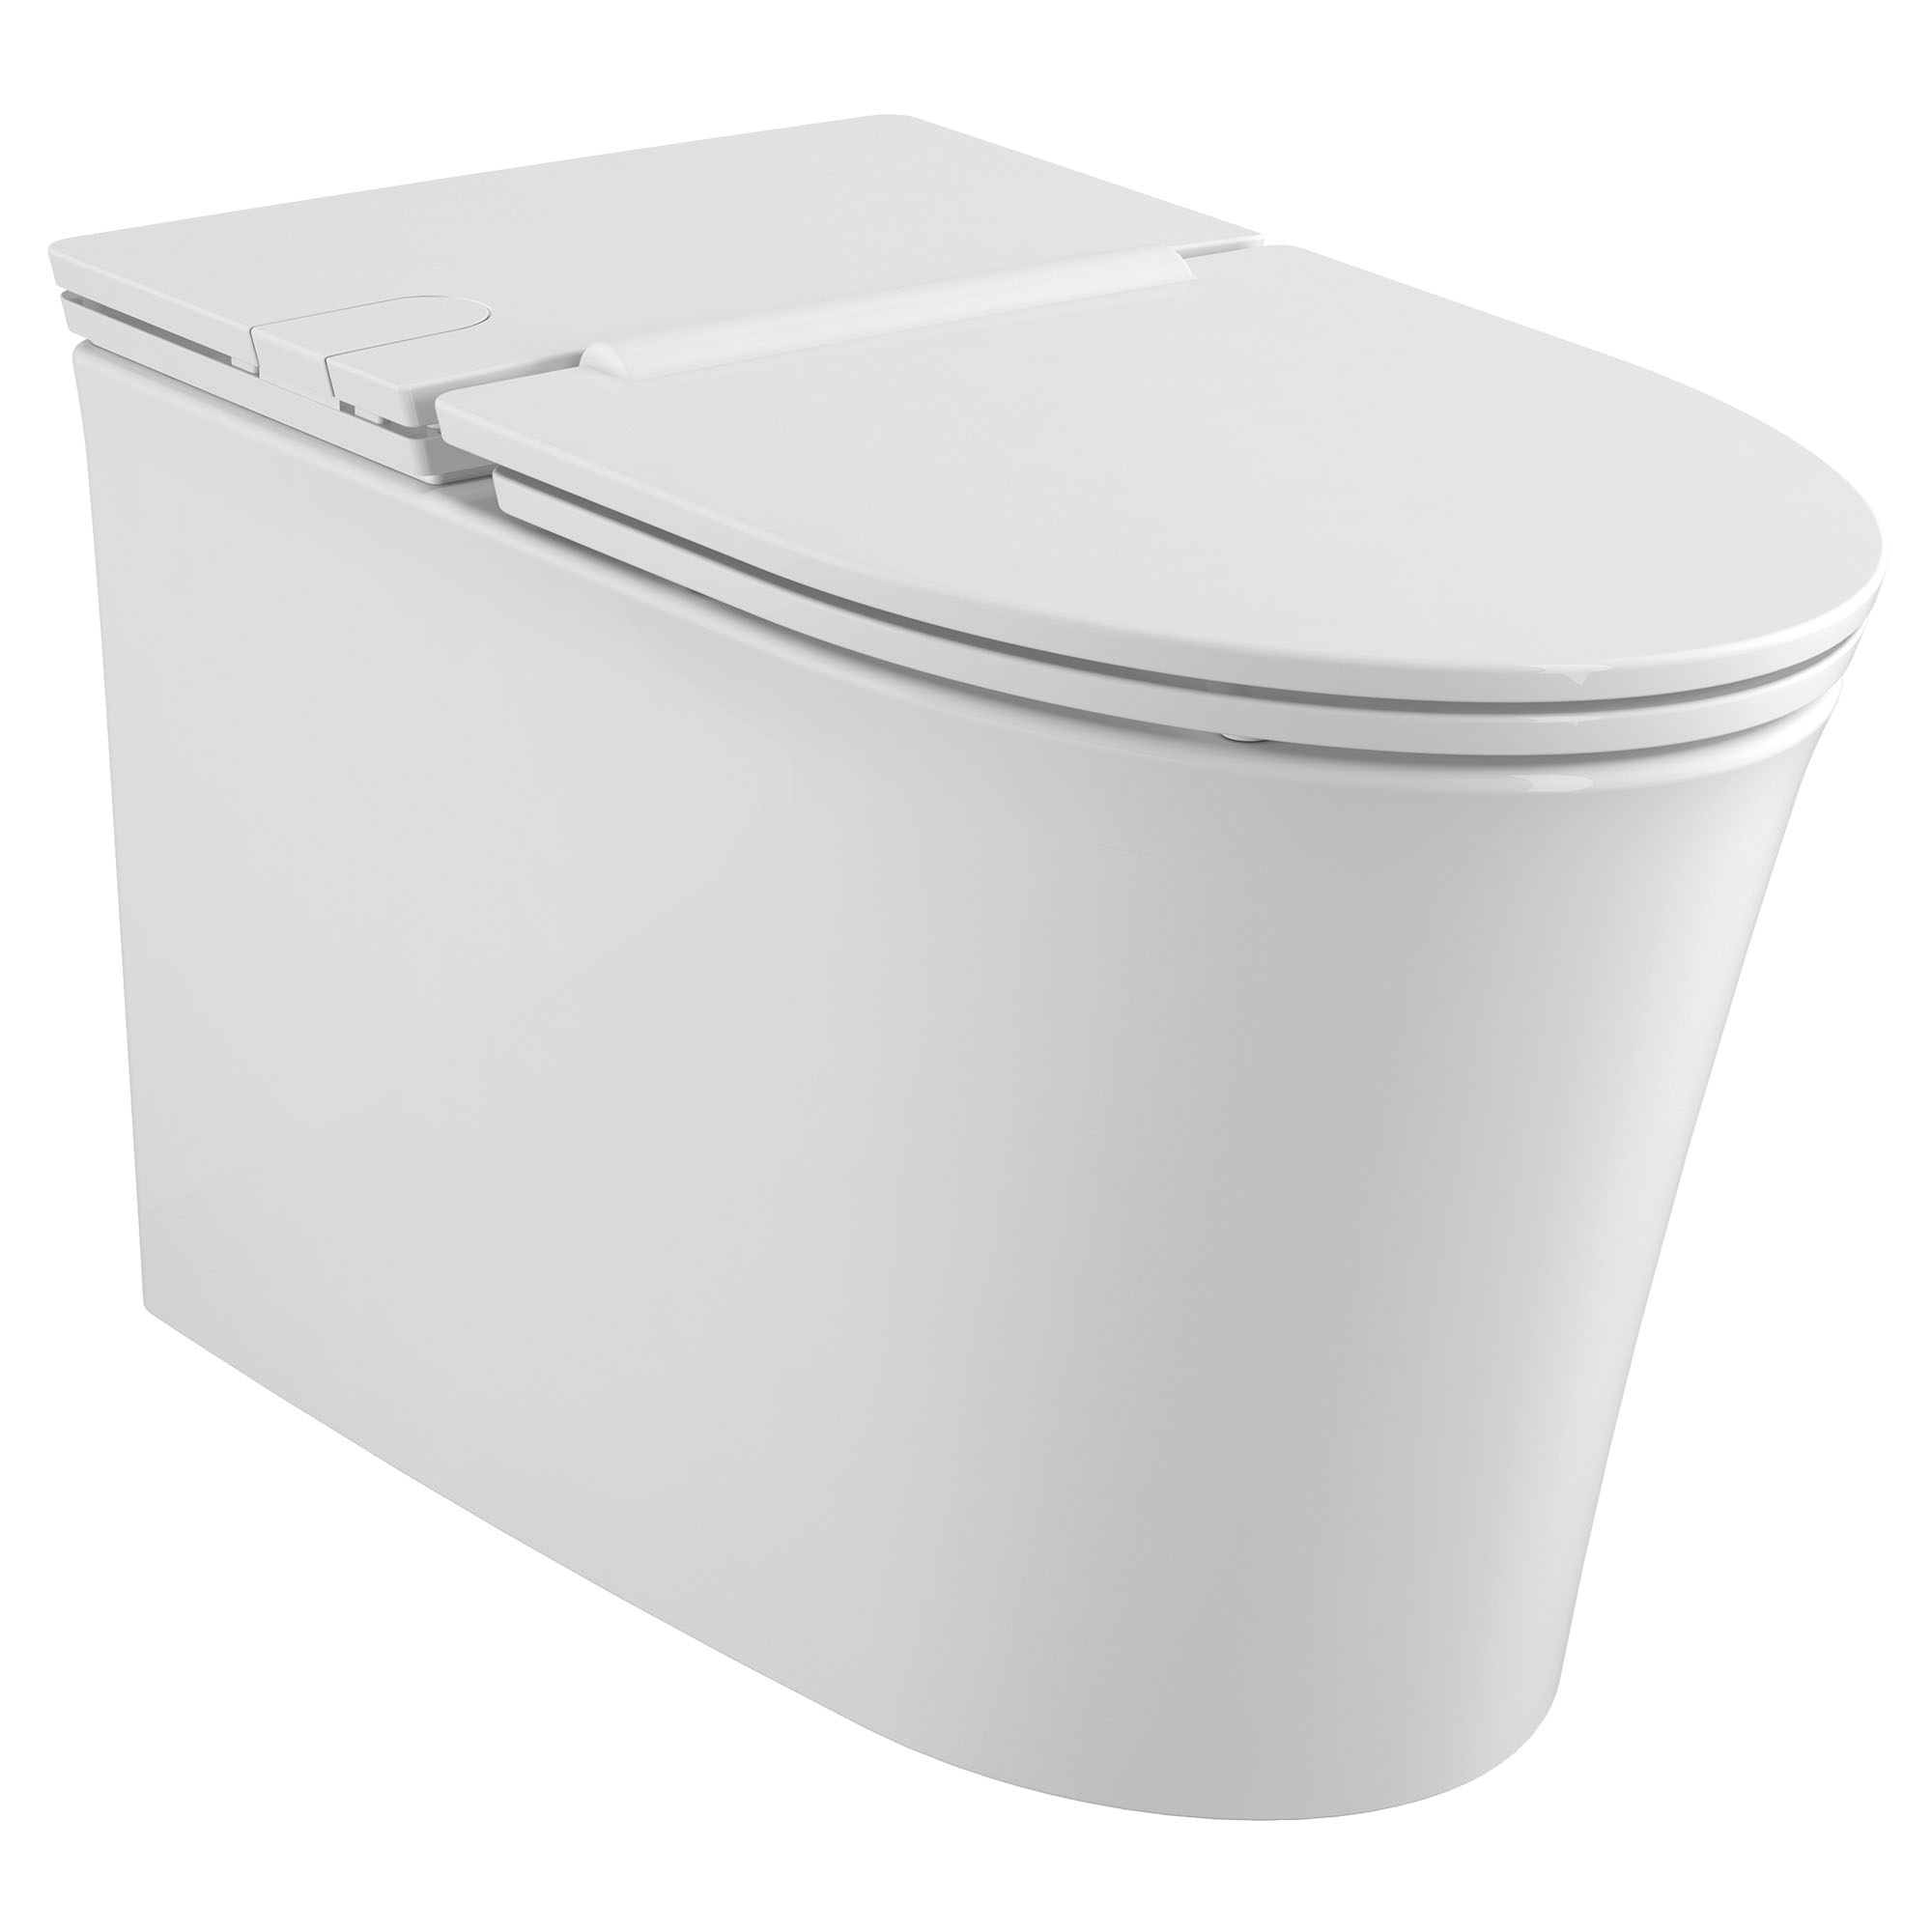 American Standard Studio S 1-piece 1.0 GPF White Elongated Low-Profile Toilet, Seat Included - image 1 of 14